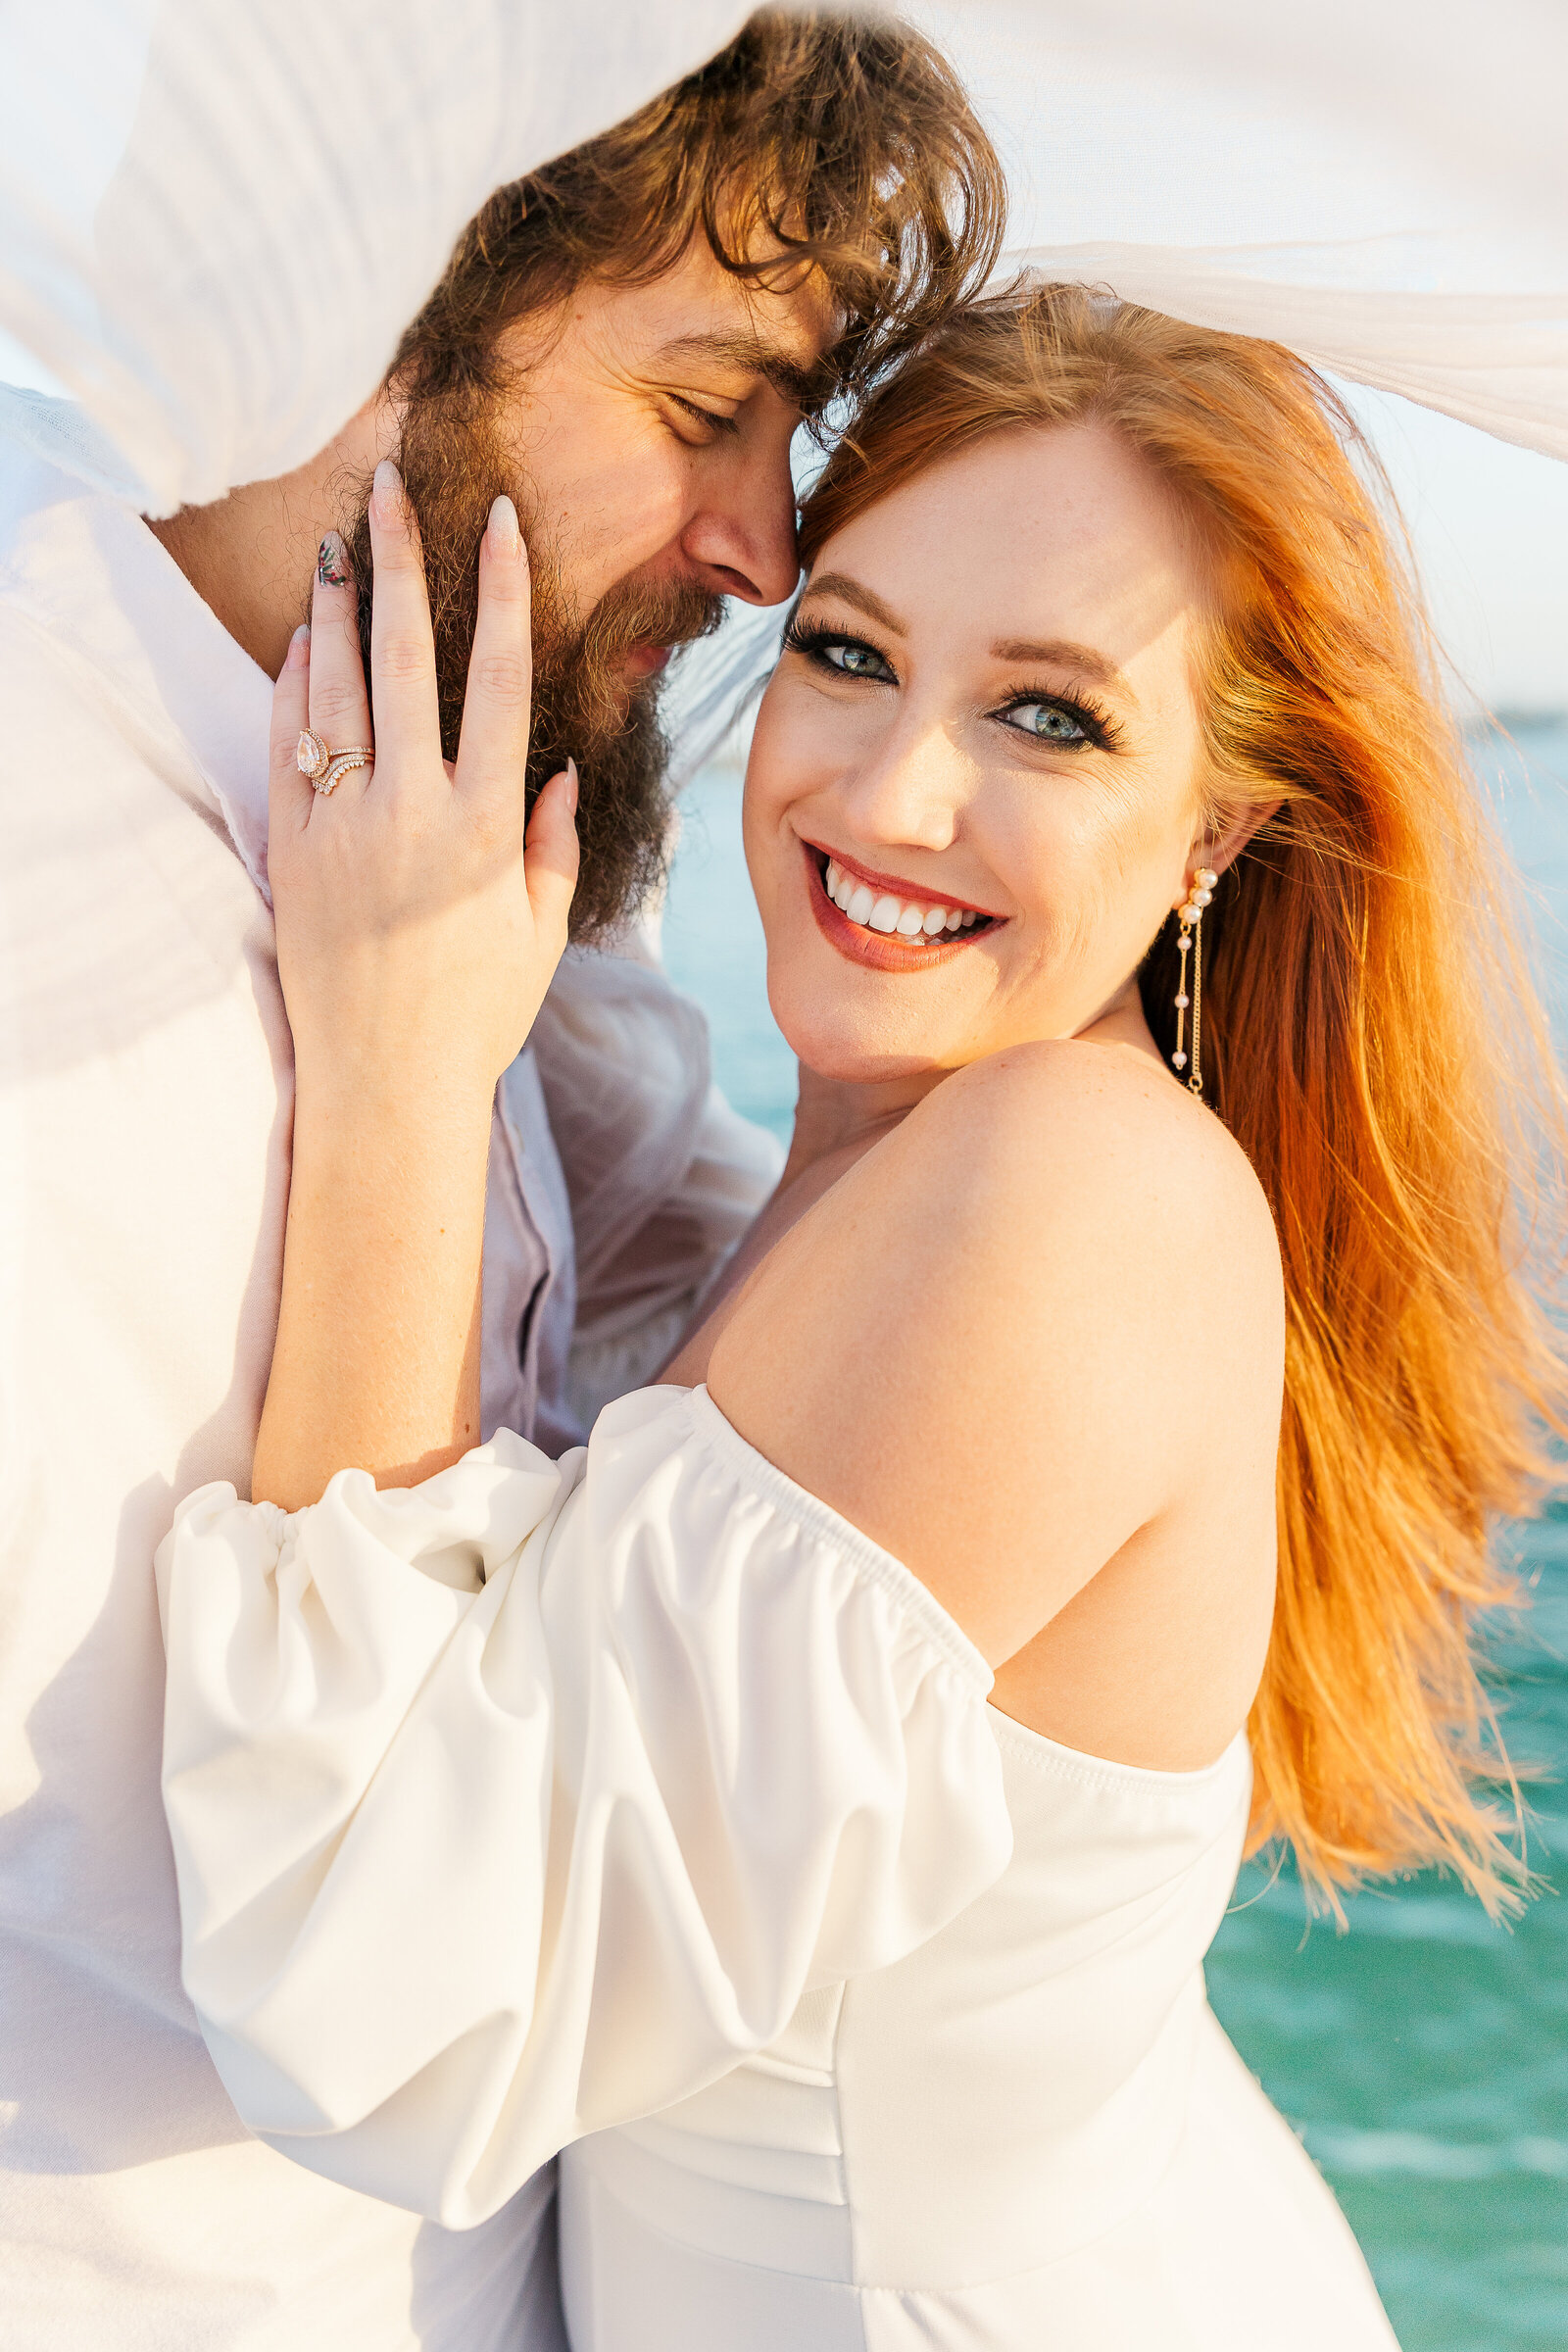 A newly married couple embraces on a sailboat as the bride smiles at the camera